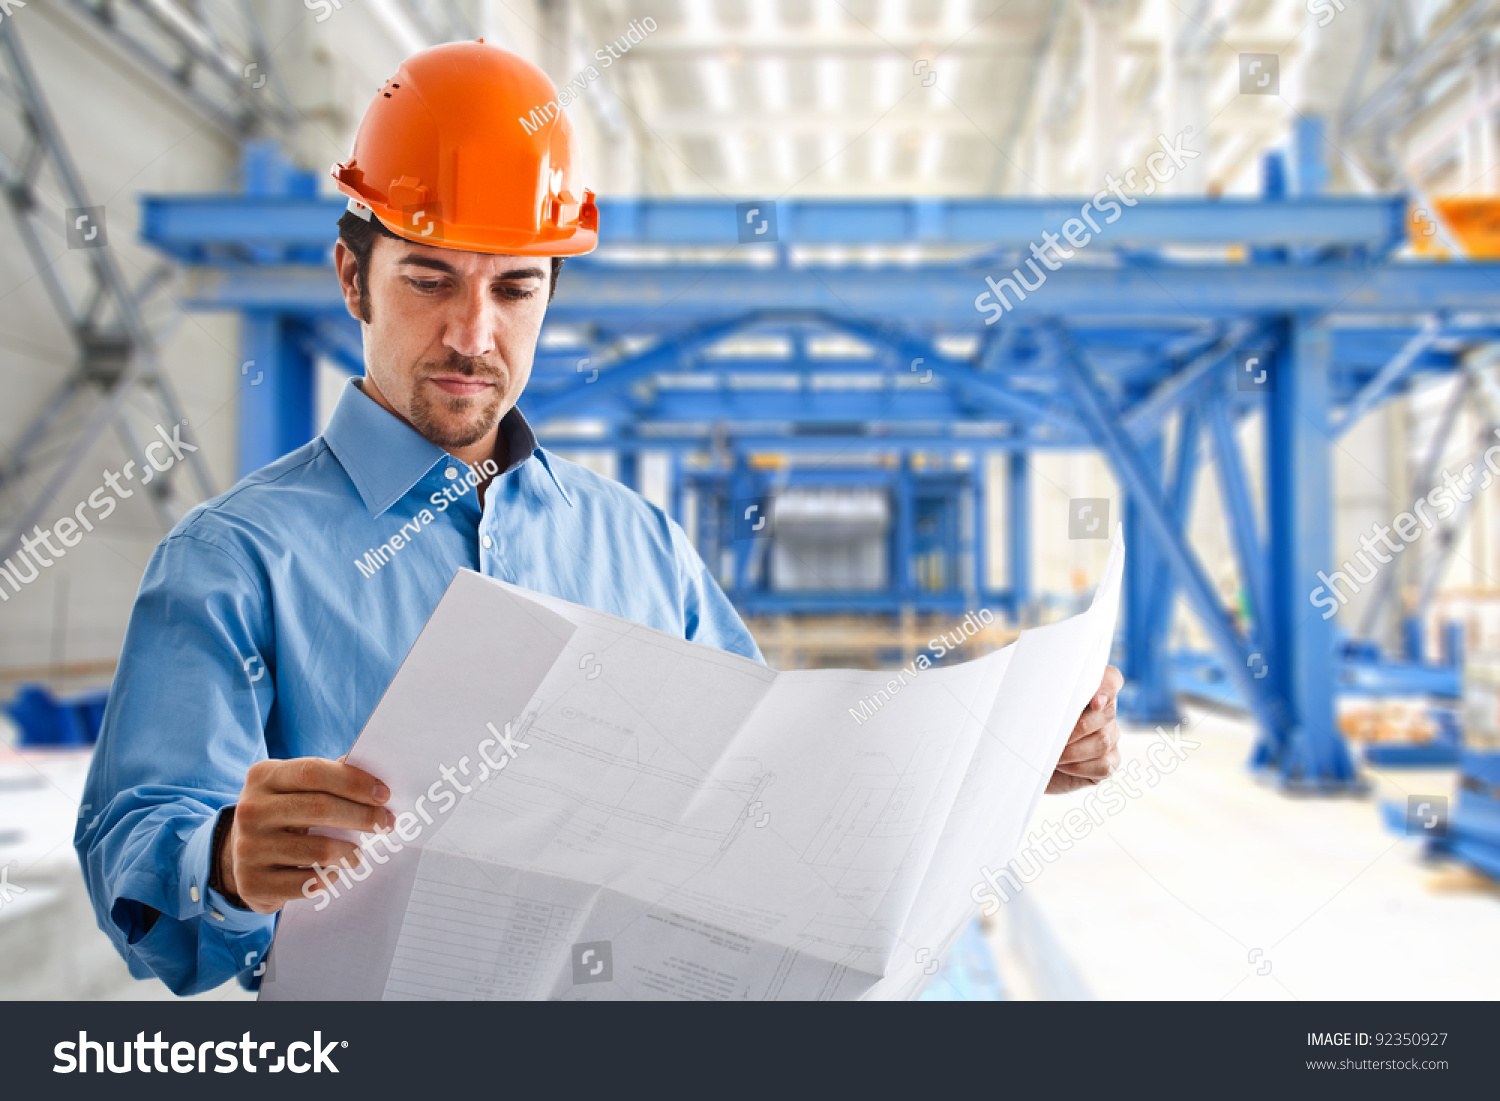 http://image.shutterstock.com/z/stock-photo-portrait-of-a-site-manager-reading-a-drawing-92350927.jpg